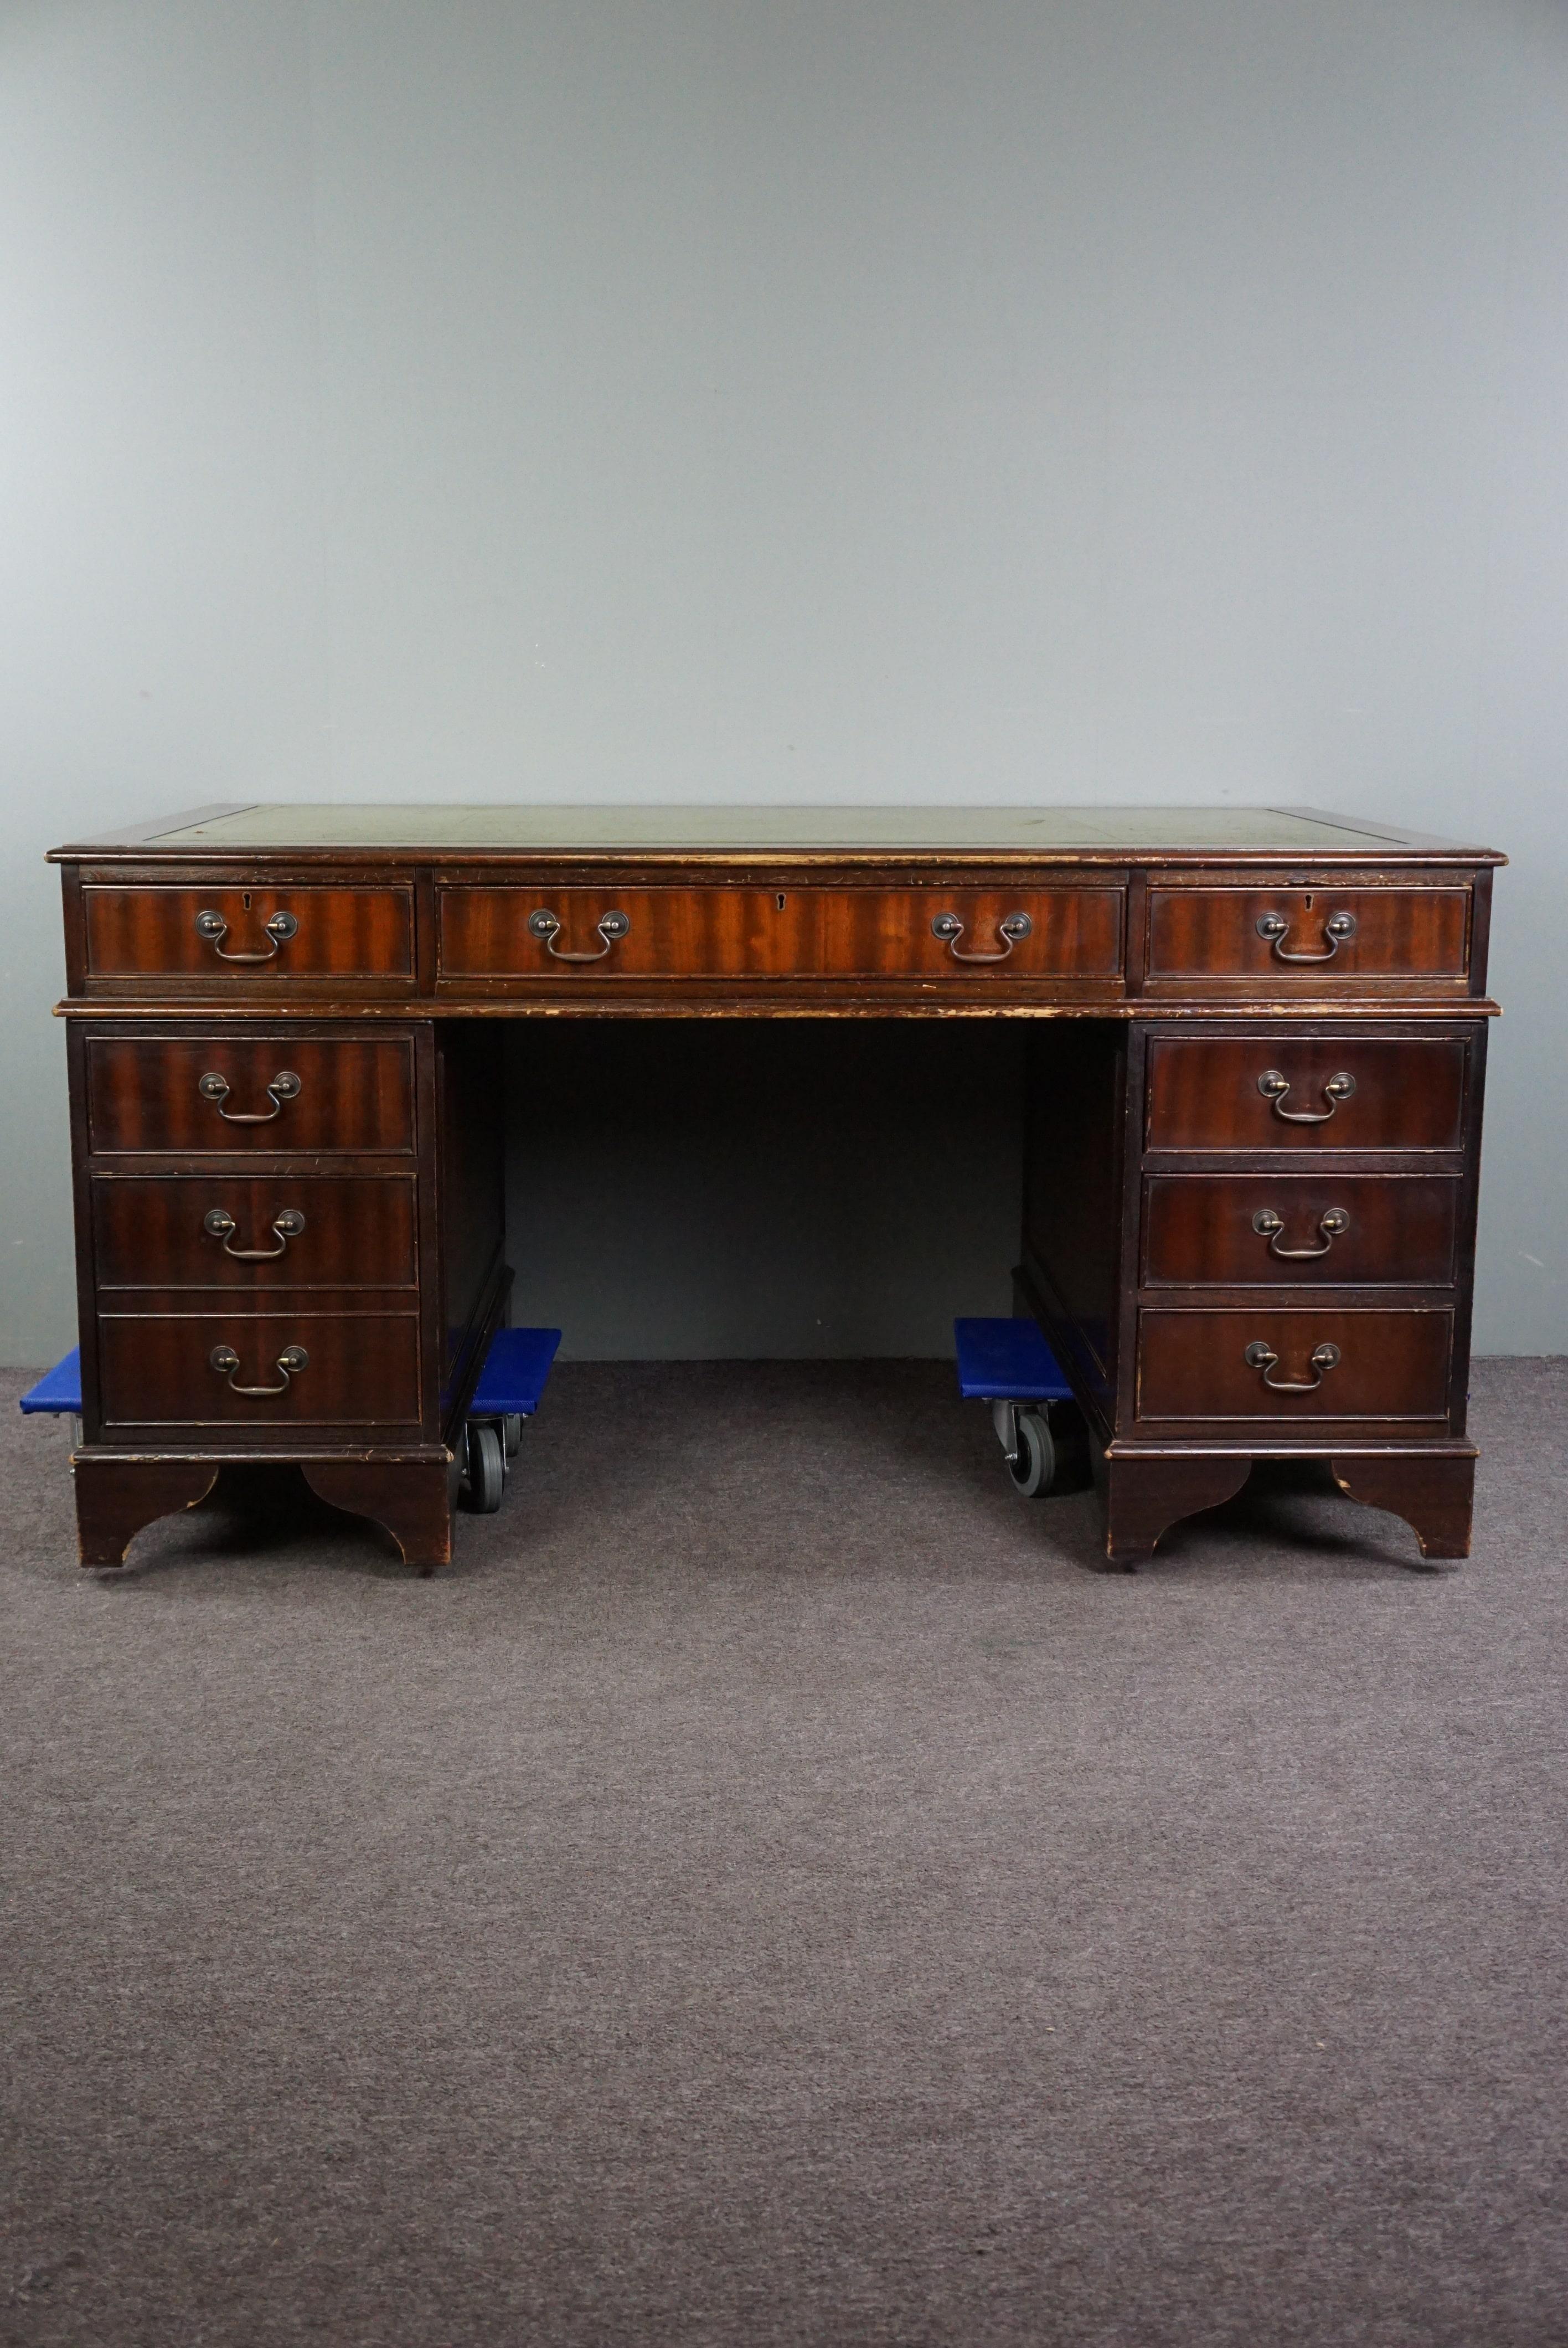 With pleasure, we are pleased to offer you this beautiful wooden Chesterfield desk, featuring a top inlaid with green leather.

This beautifully designed desk has a distinctive lived-in appearance. The desk features a leather-inlaid top and an